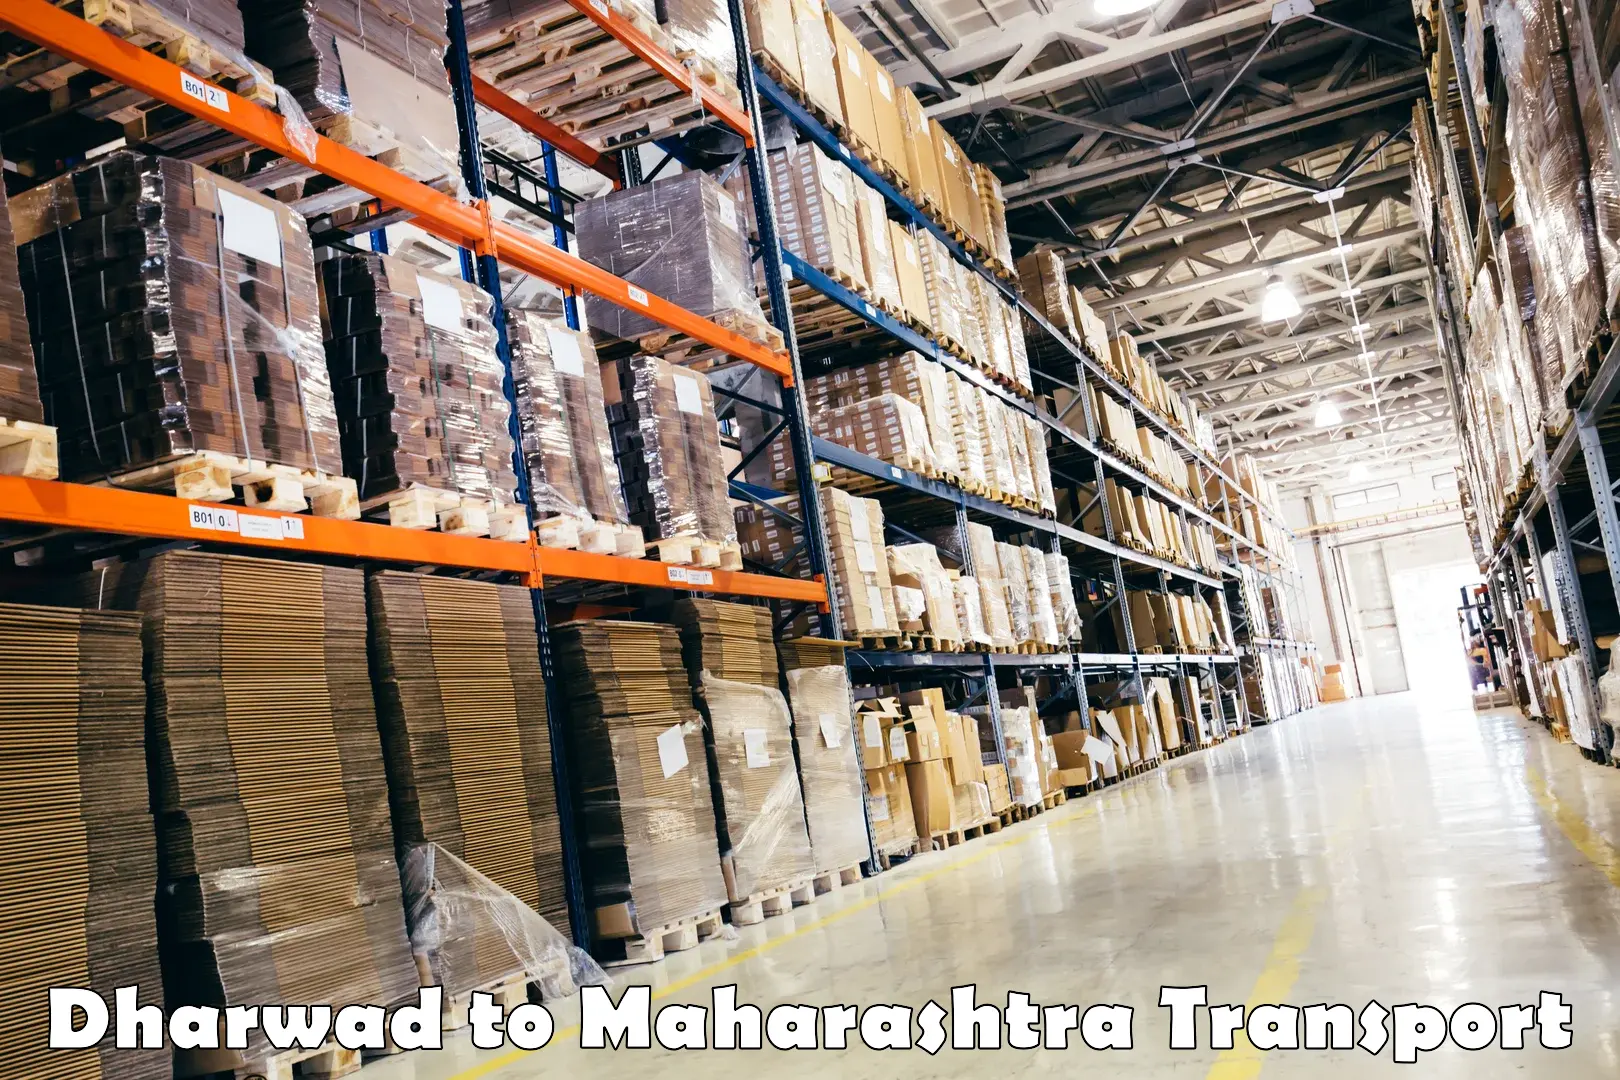 Transport bike from one state to another in Dharwad to Maharashtra